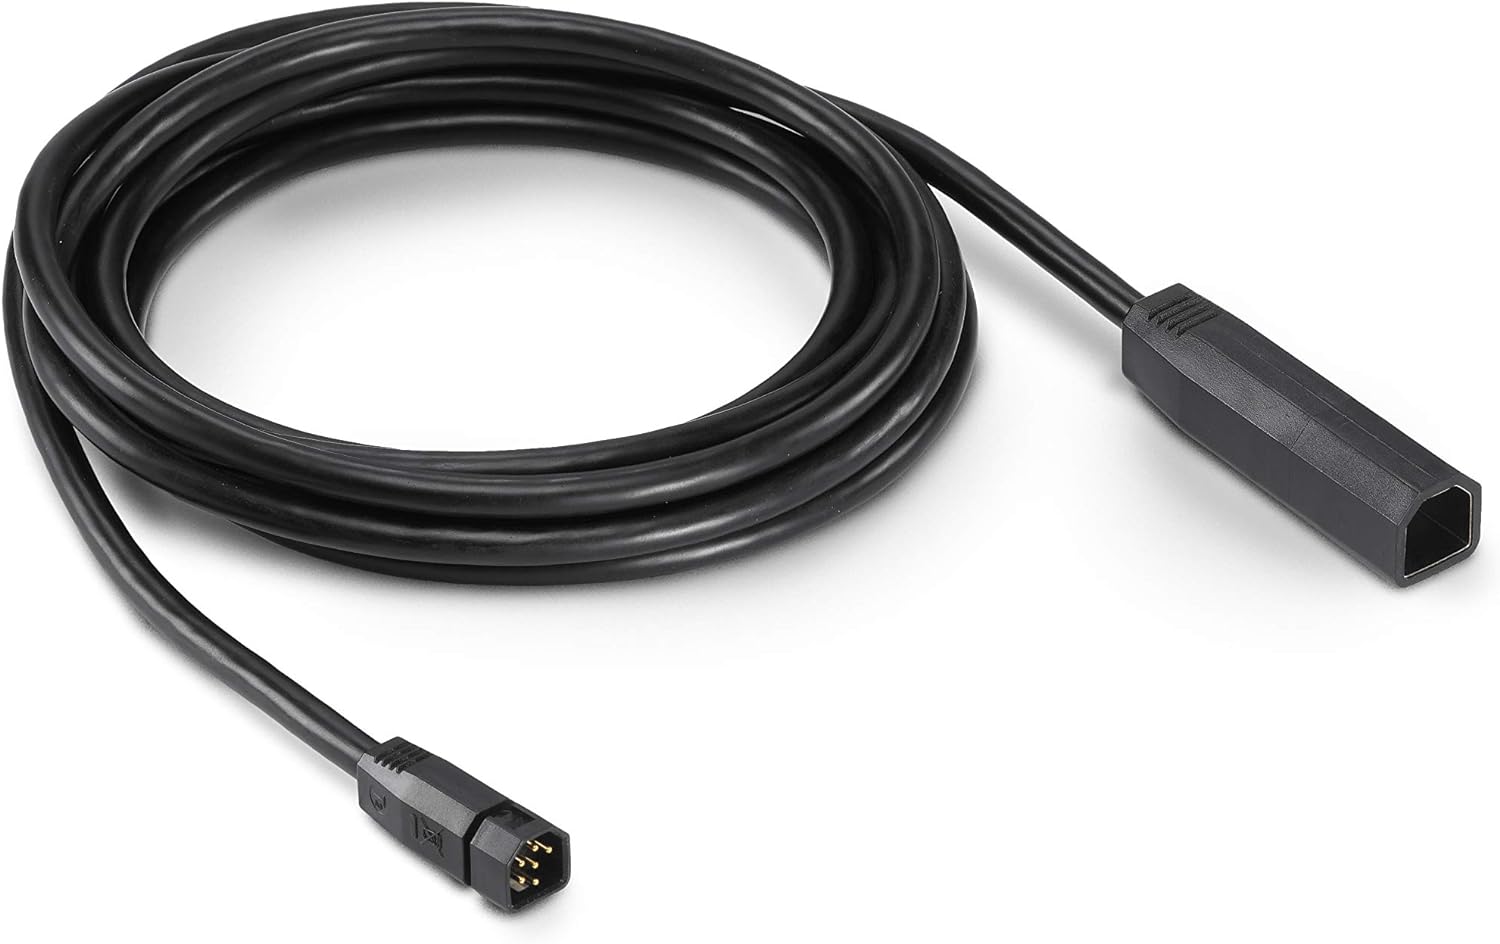 Humminbird Transducer Extension Cable - Humminbird Transducer Extension Cable Review